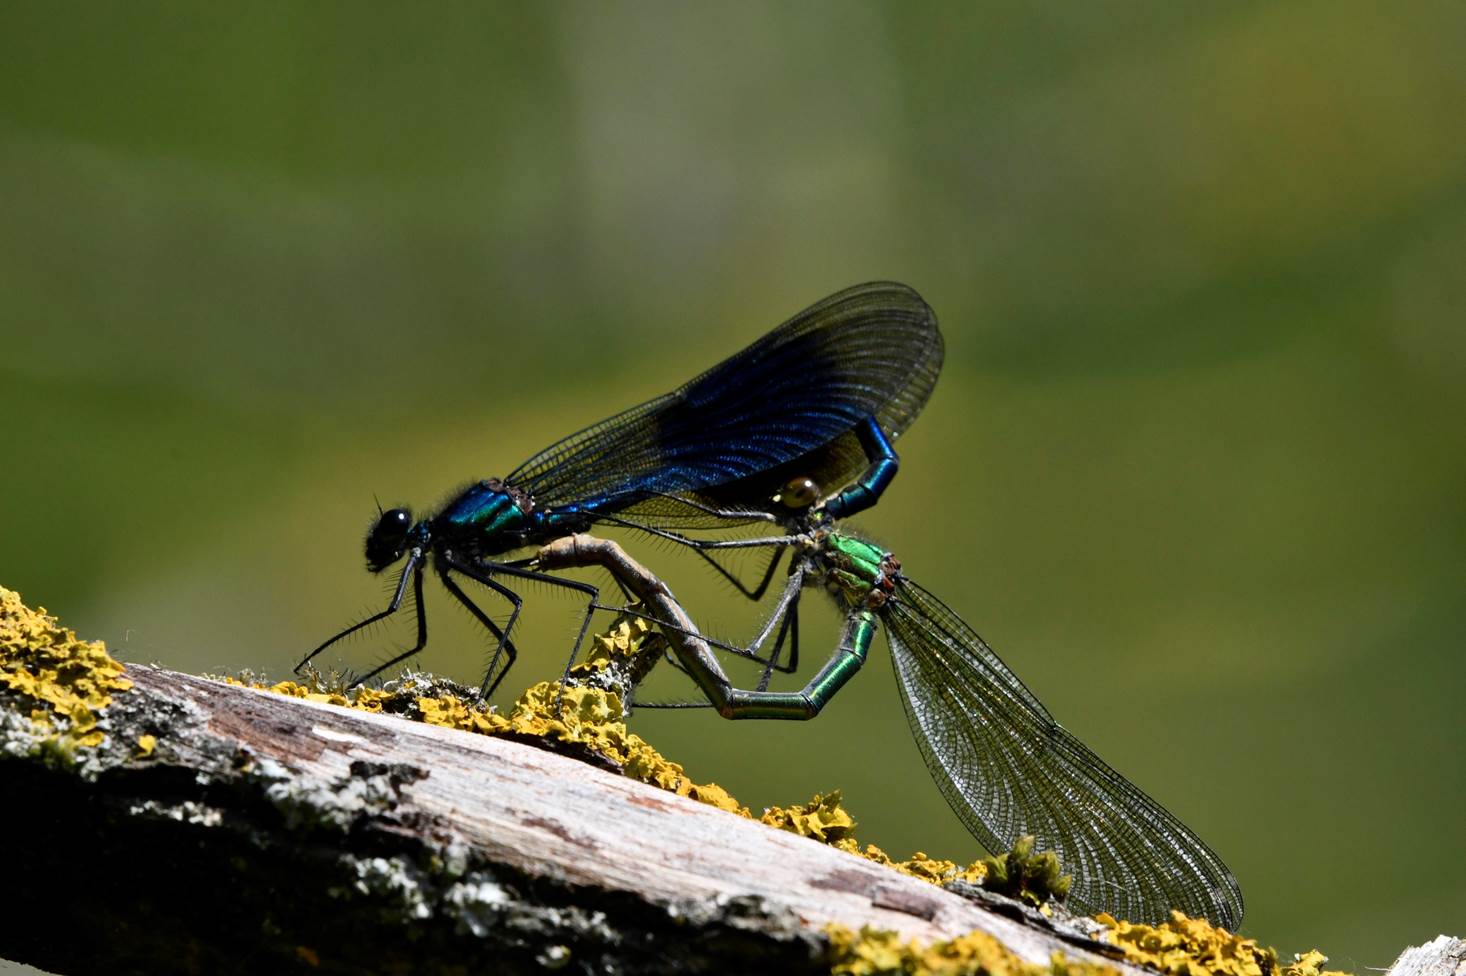 A pair of dragonflies on a branch

Description automatically generated